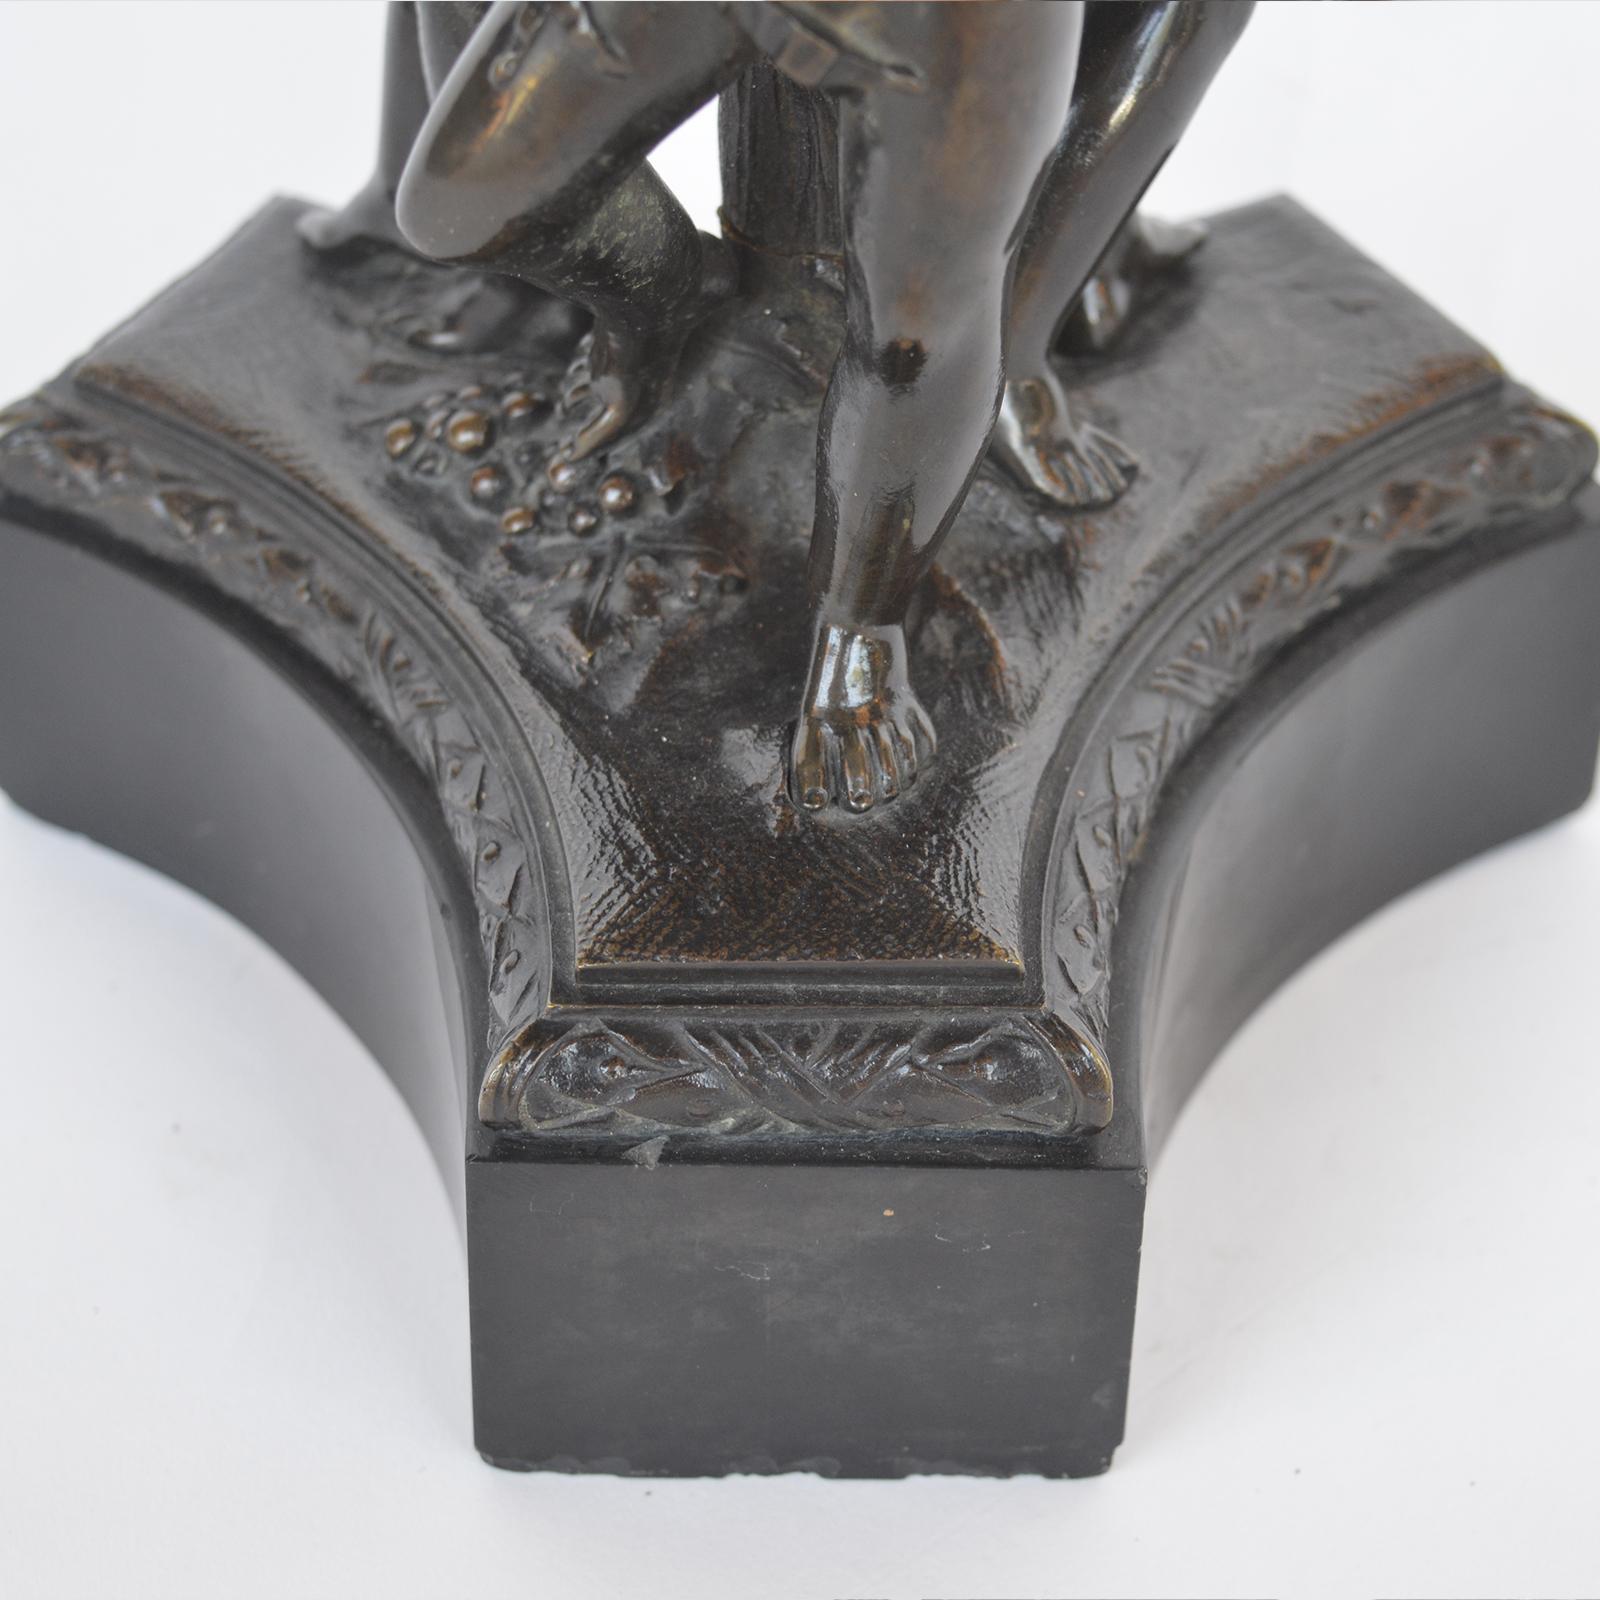 Italian Bronze and Black Marble Bacchanalian Figural Tazza, Early 19th Century For Sale 6